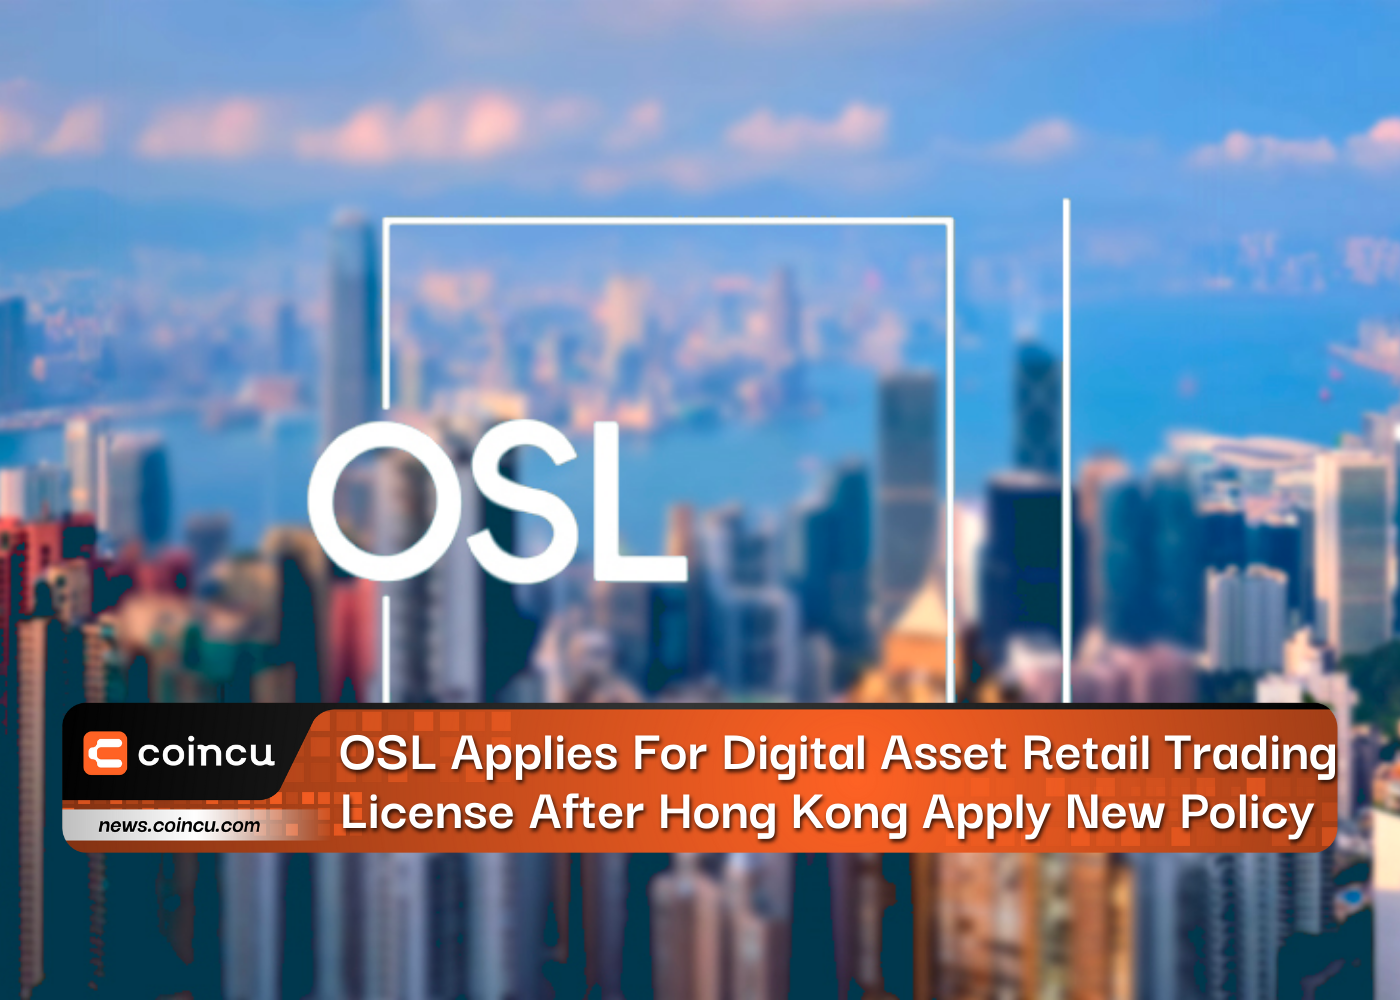 OSL Applies For Digital Asset Retail Trading License After Hong Kong Apply New Policy